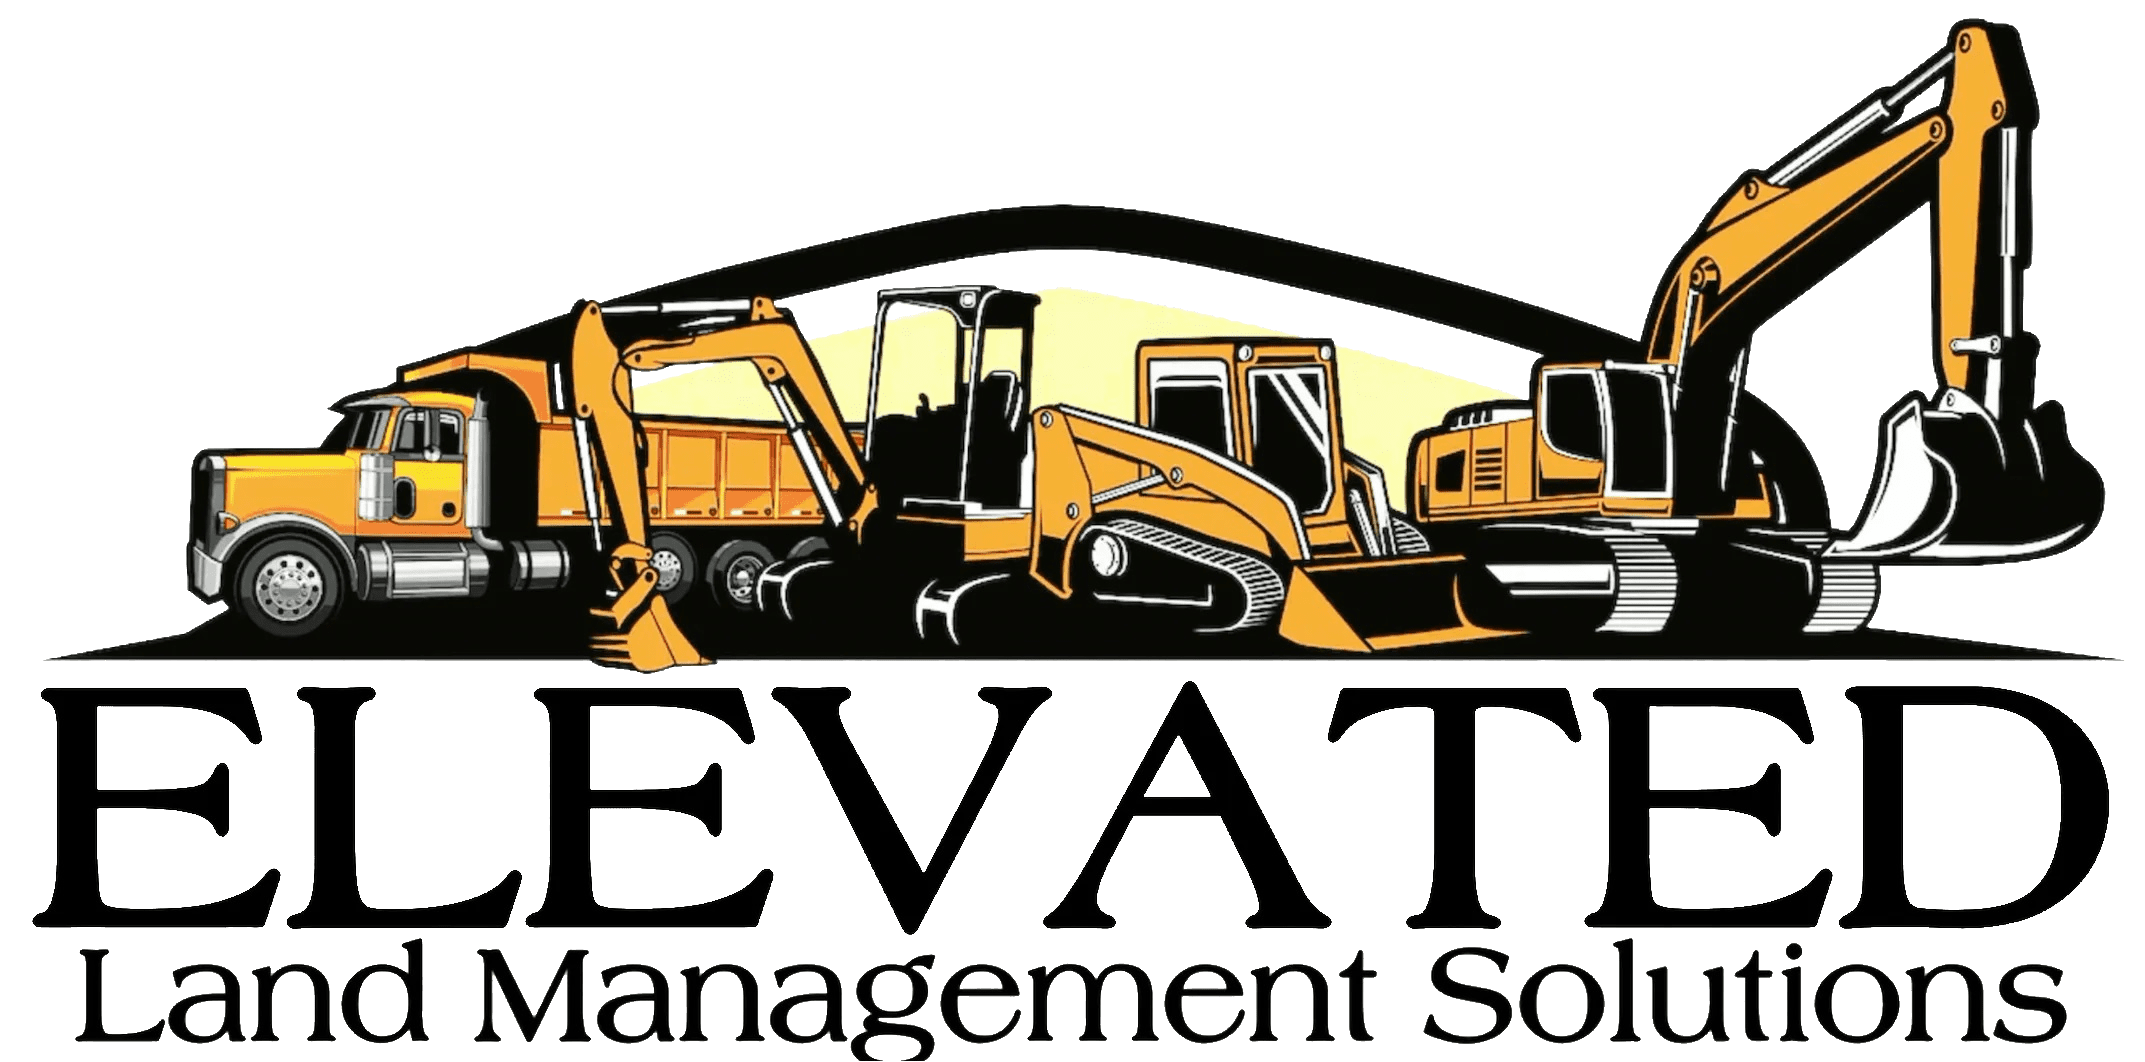 Excavation Contractor Forest City, NC Site Preparation Grading Company